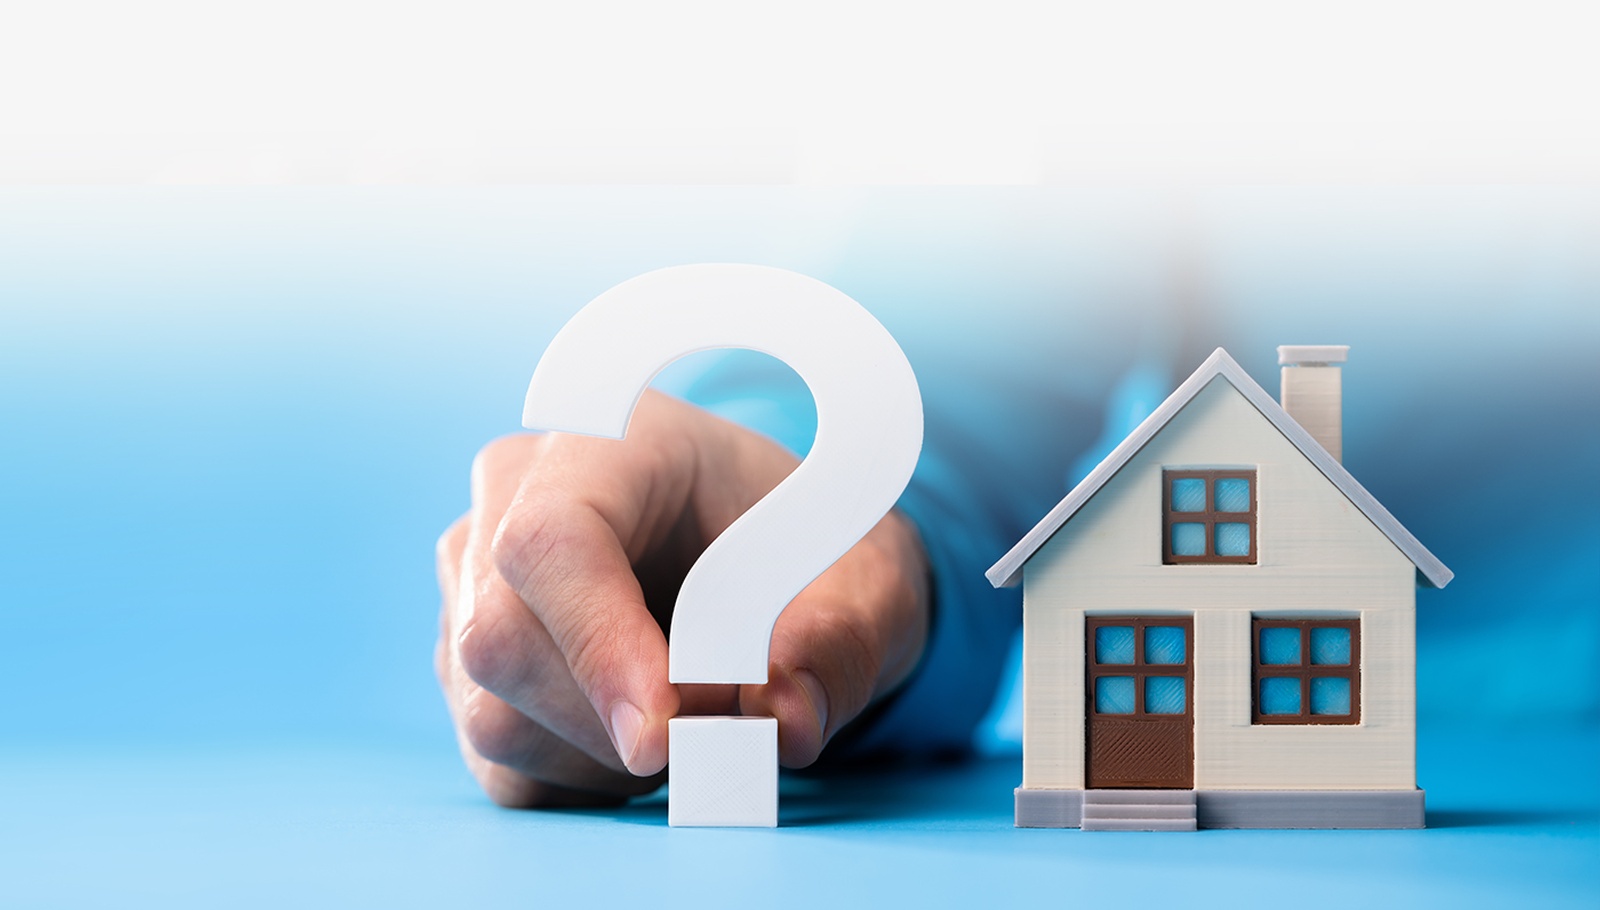 Frequently Asked Questions (FAQs) about Mortgages